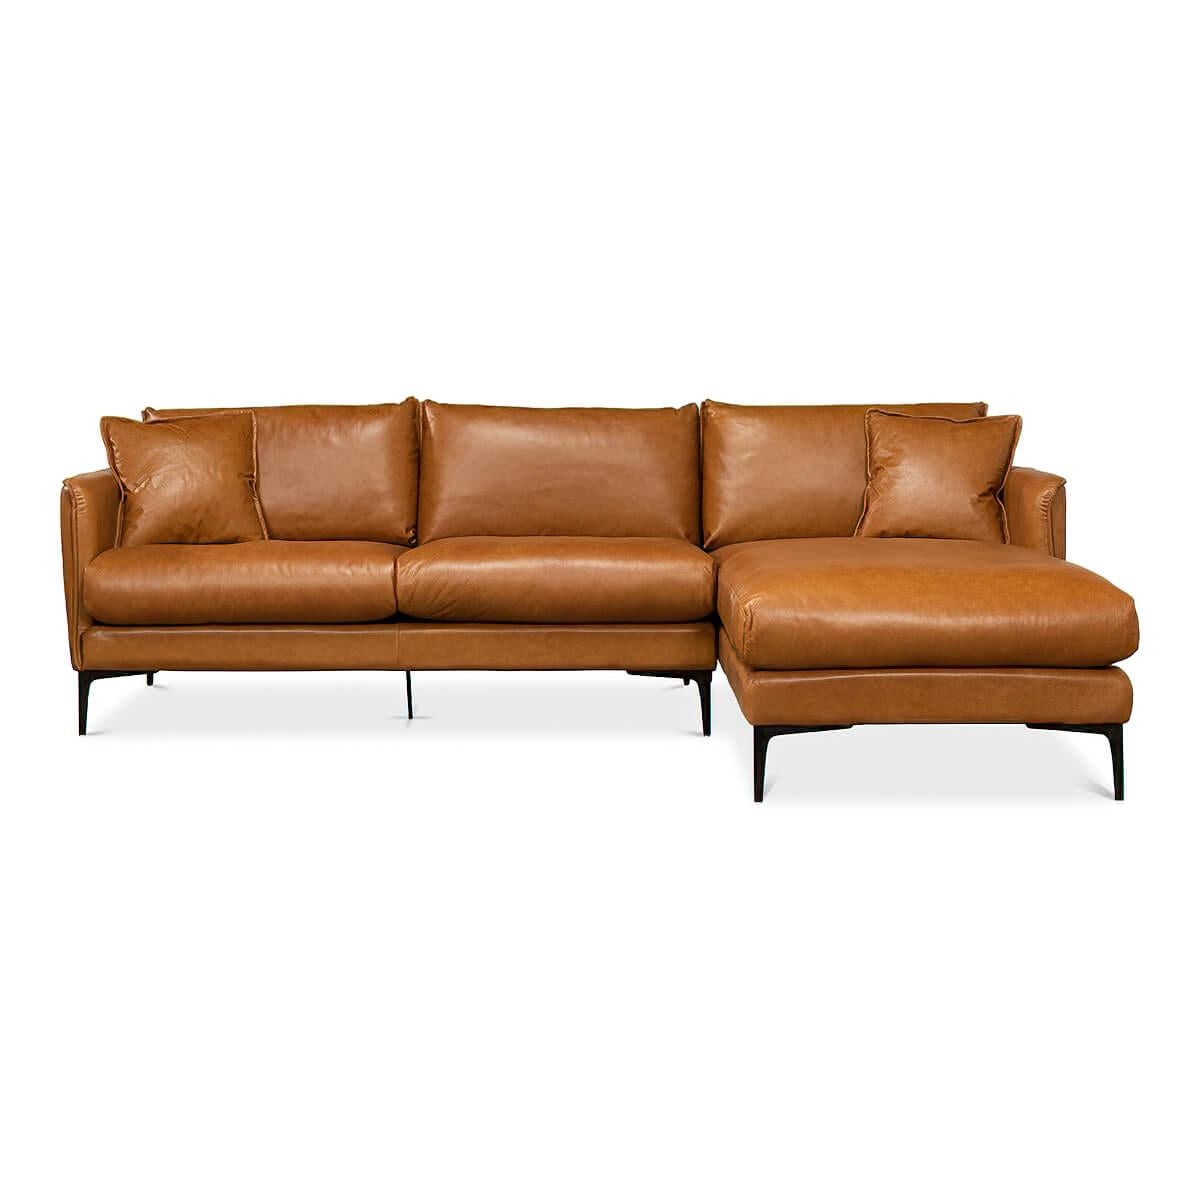 An Italian style Mid-Century Modern leather upholstered section sofa. In a top grain tan leather with a right-facing chaise. All raised on iron flared tapered legs.

Overall dimensions: 109